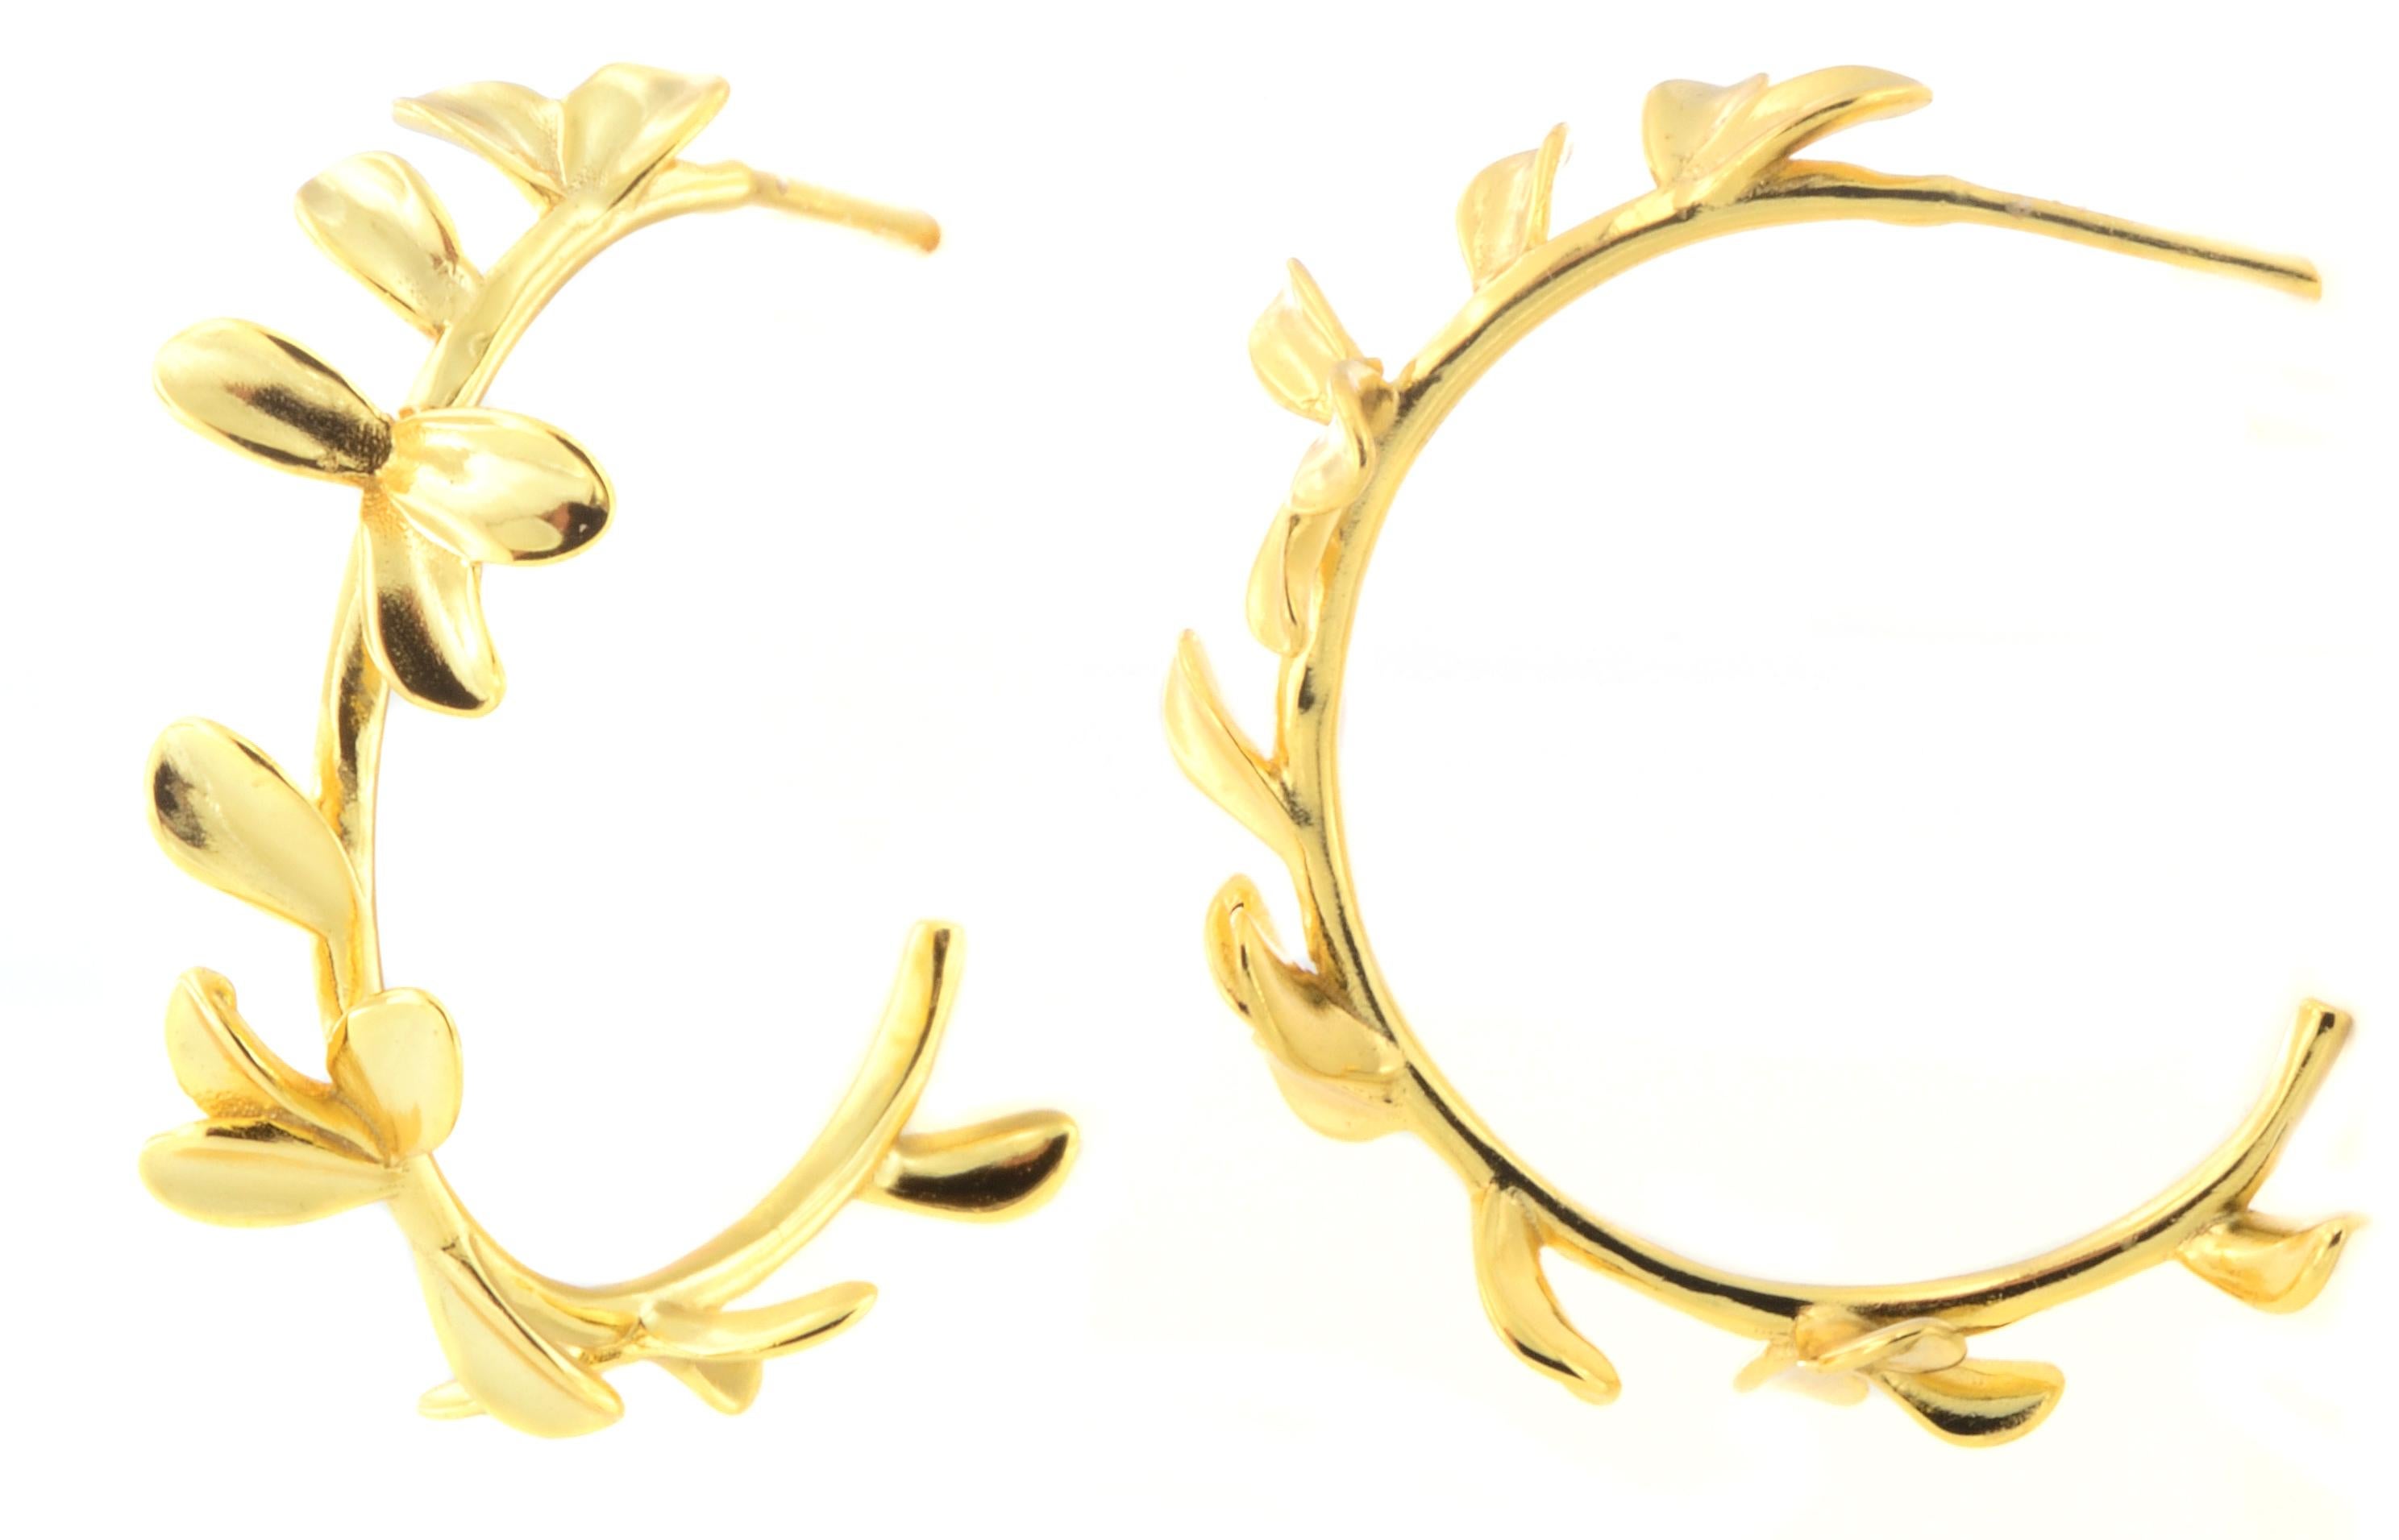 Hoop earrings branch with leaves.

Diameter : 2,00 cm.

Made of 925 sterling silver dipped in 18kt yellow gold.

Hypoallergenic.